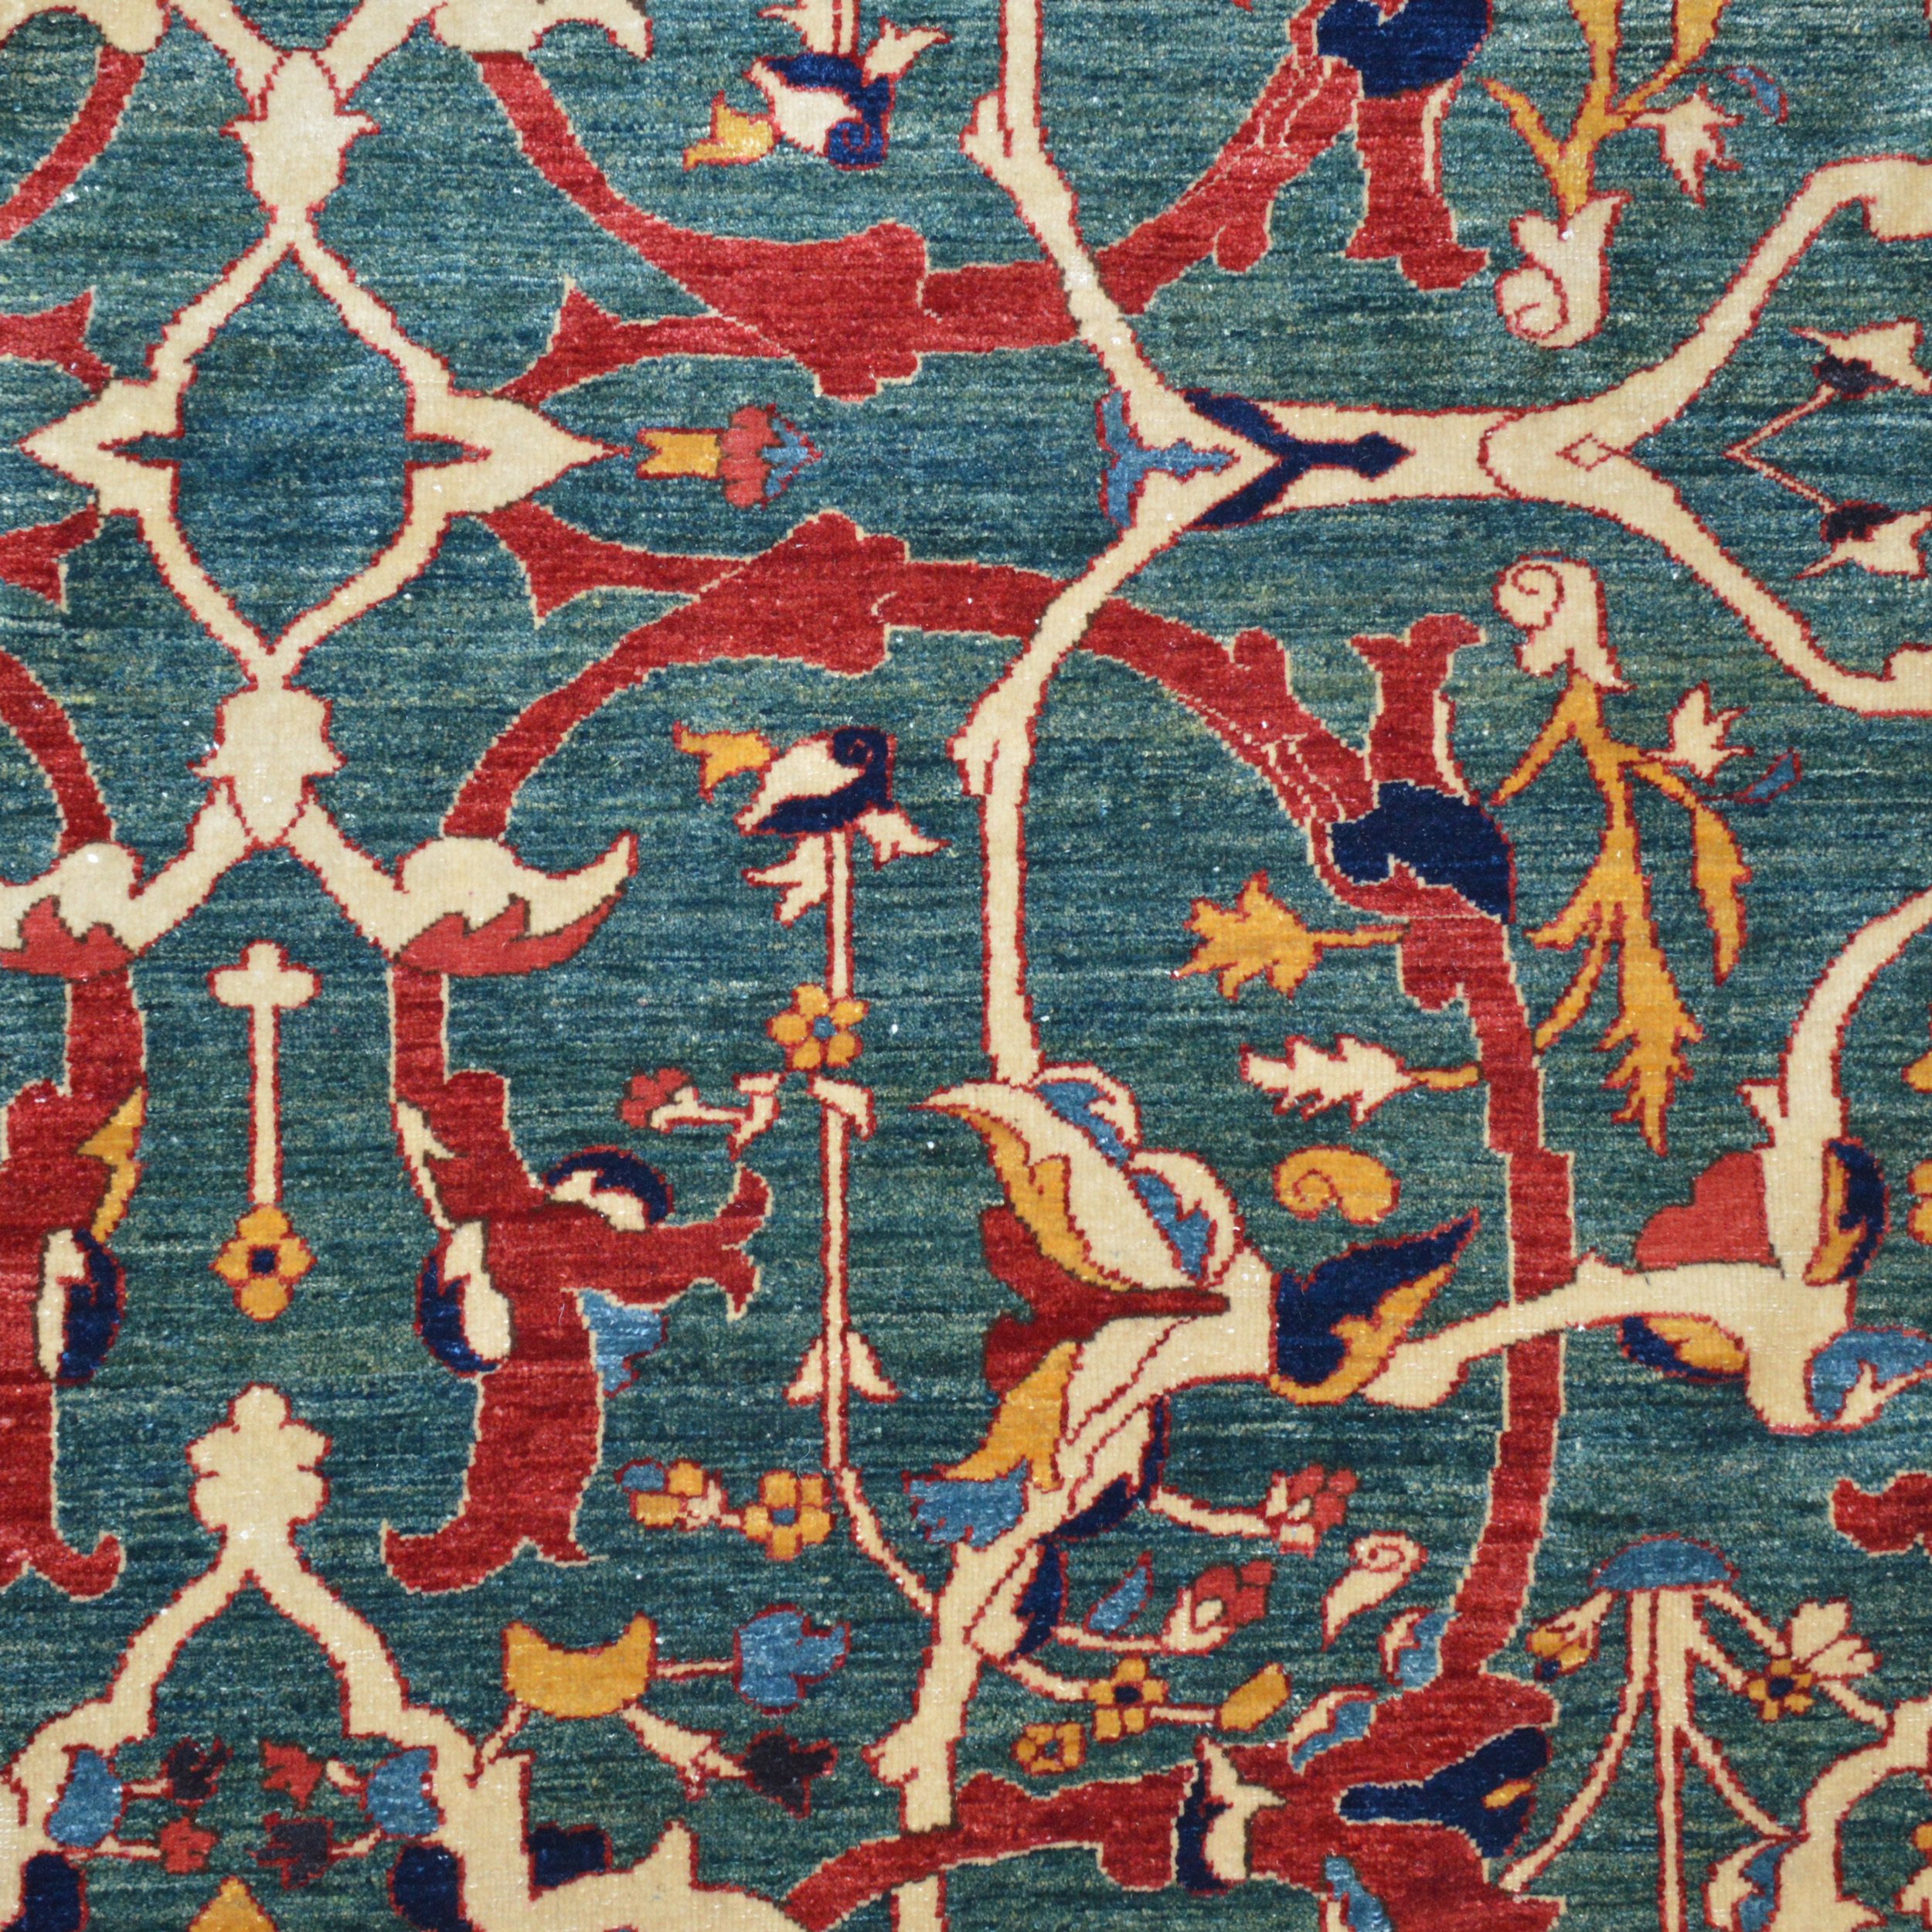 Field detail from a finely woven, new Azerbaijan carpet with an Arabesque design on a green field. Douglas Stock Gallery, antique and new Oriental rugs Boston,MA area New England